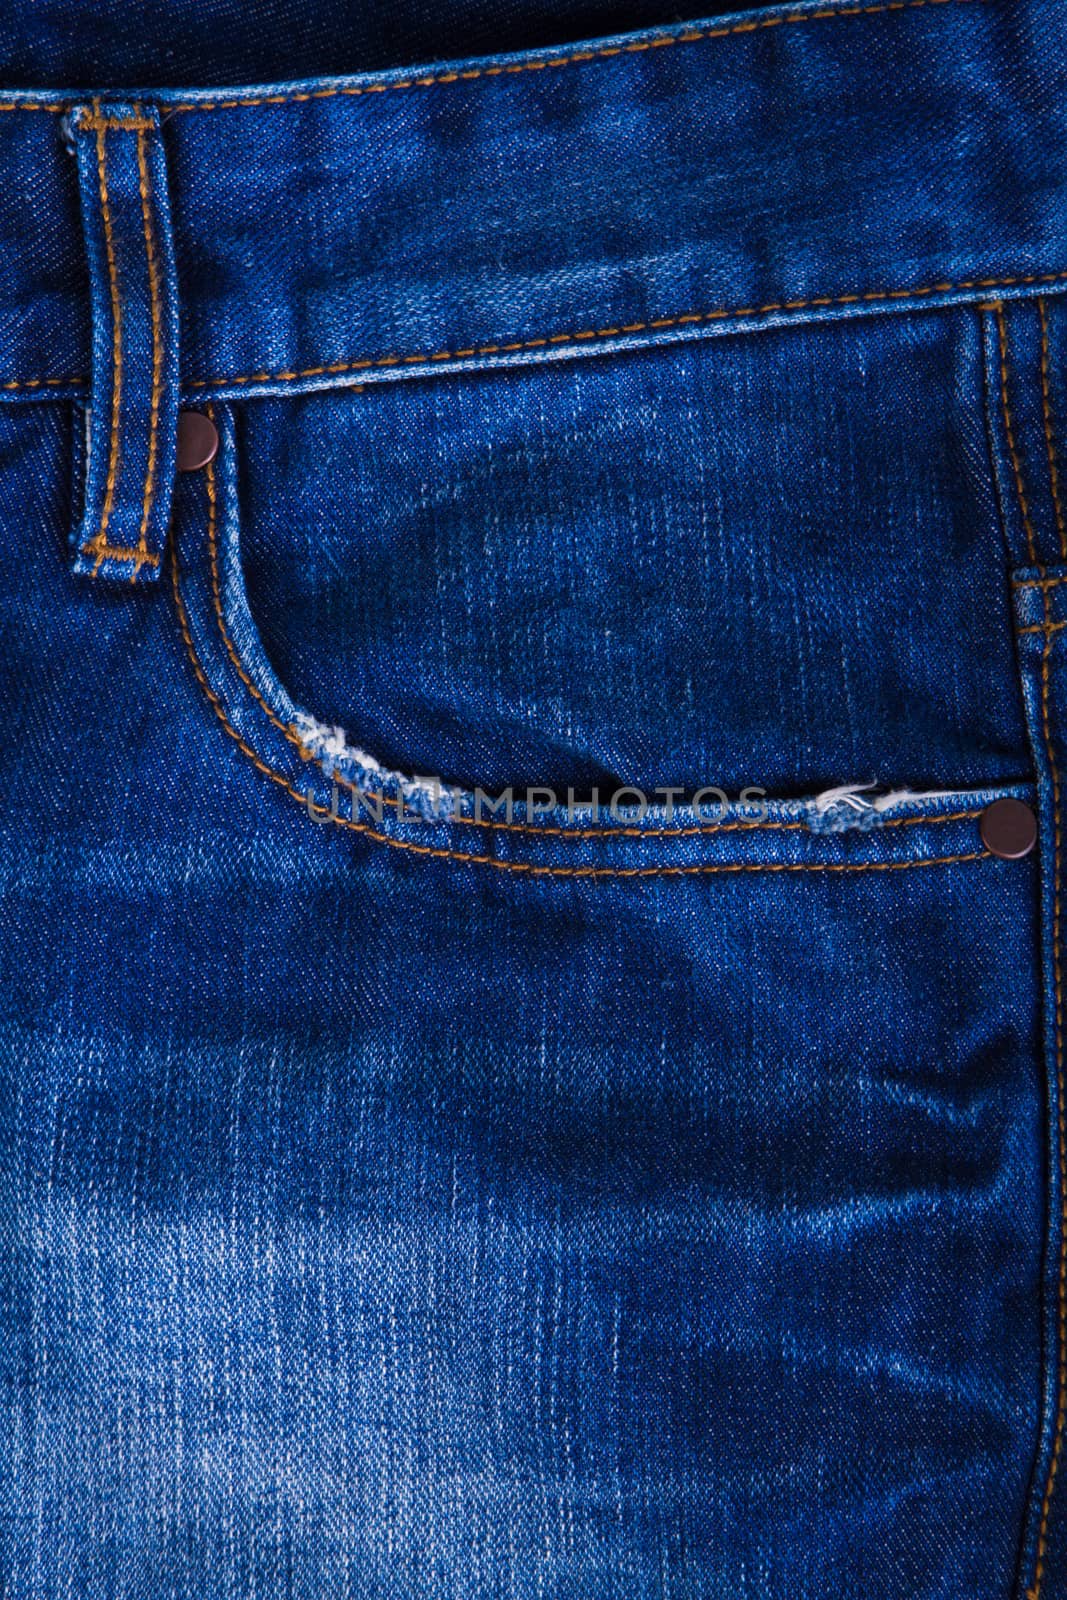 Jeans pocket in close up by grigorenko